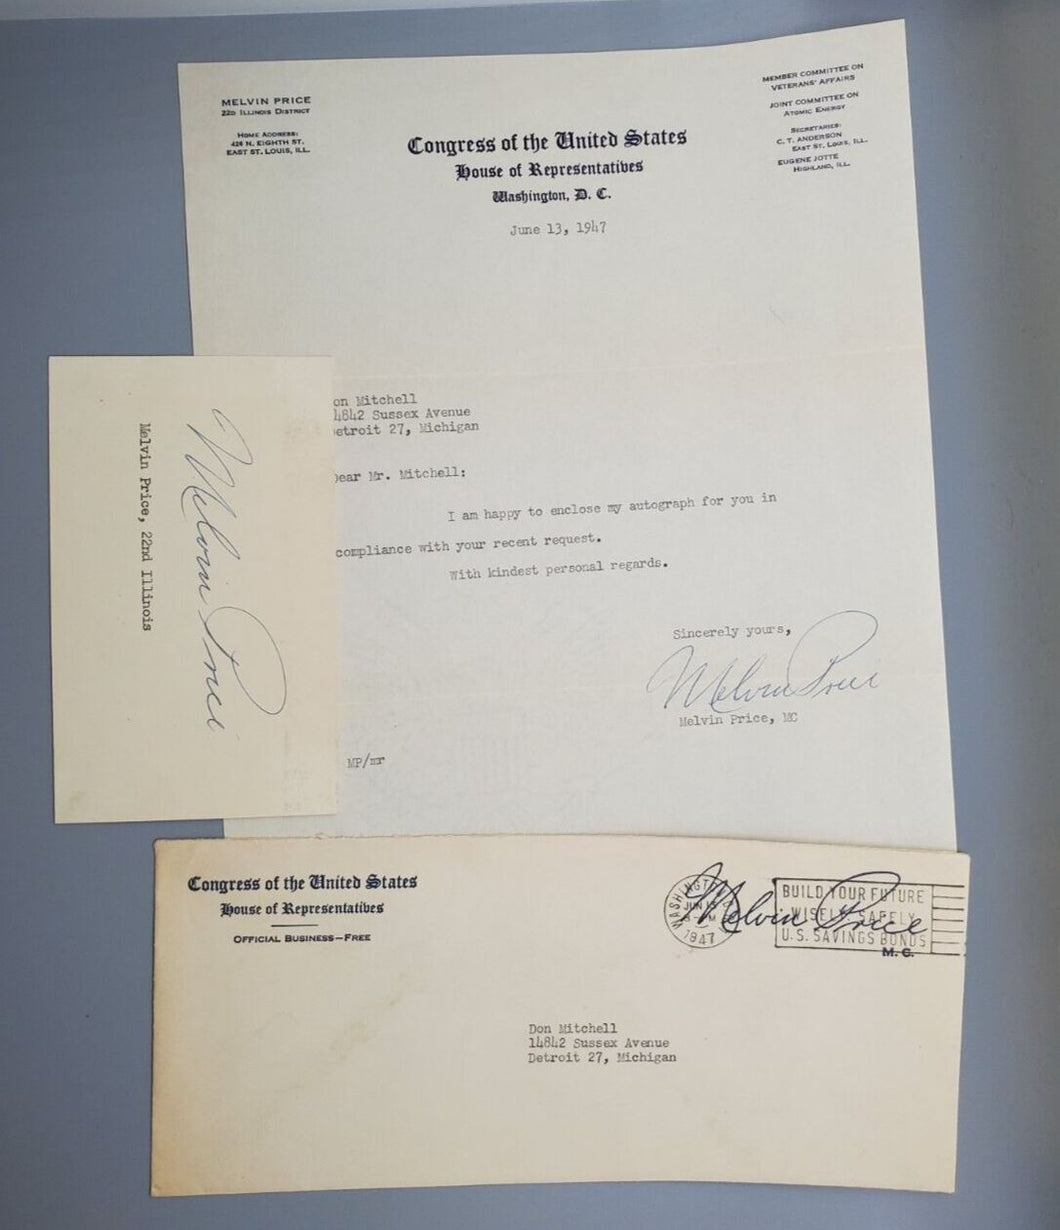 1947 Autograph Melvin Price Signed Congress of the United States (with envelope)